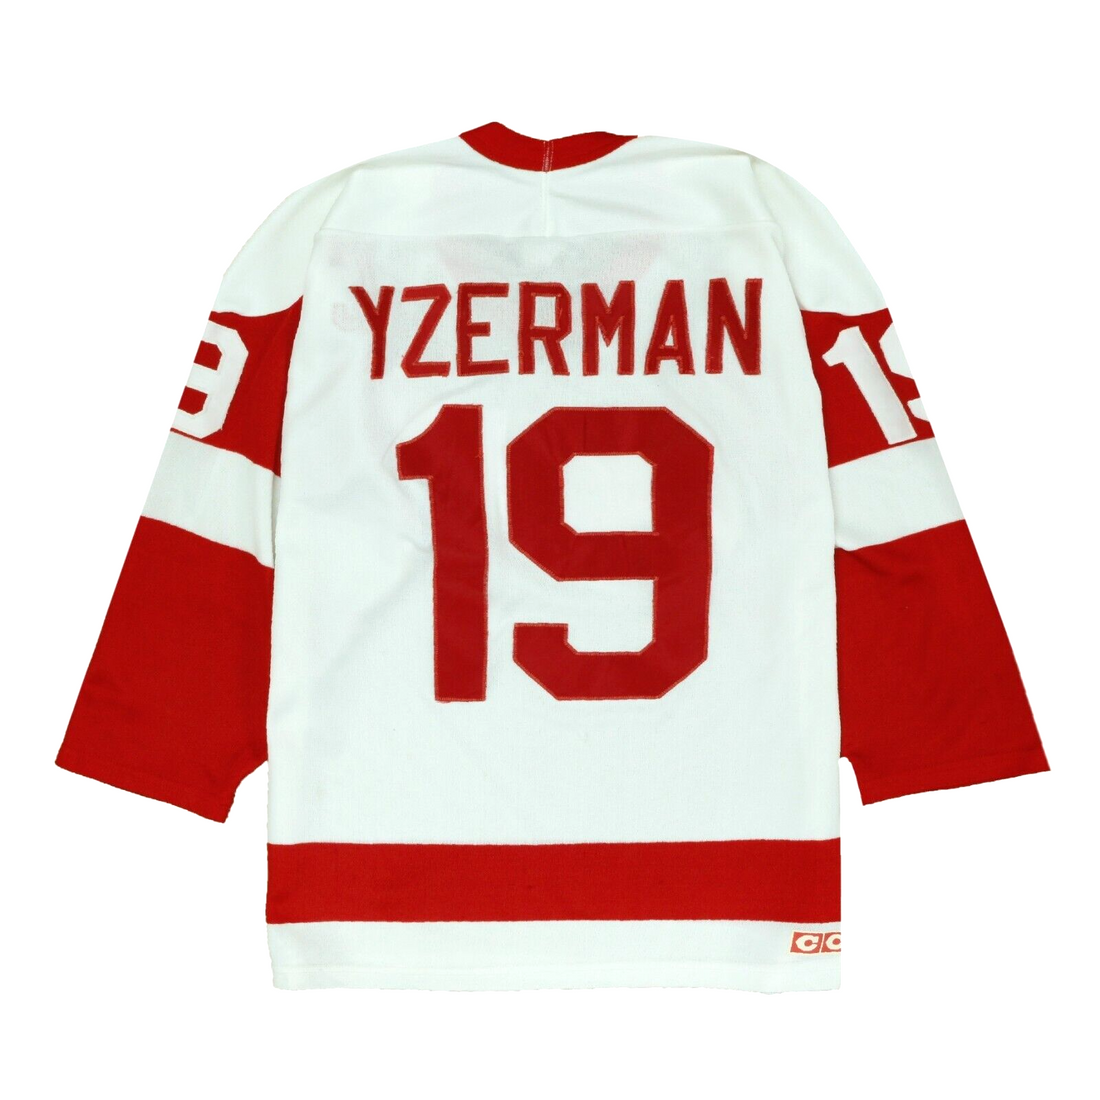 Vintage Red Wings Steve Yzerman 19 Red and White Hockey Jersey